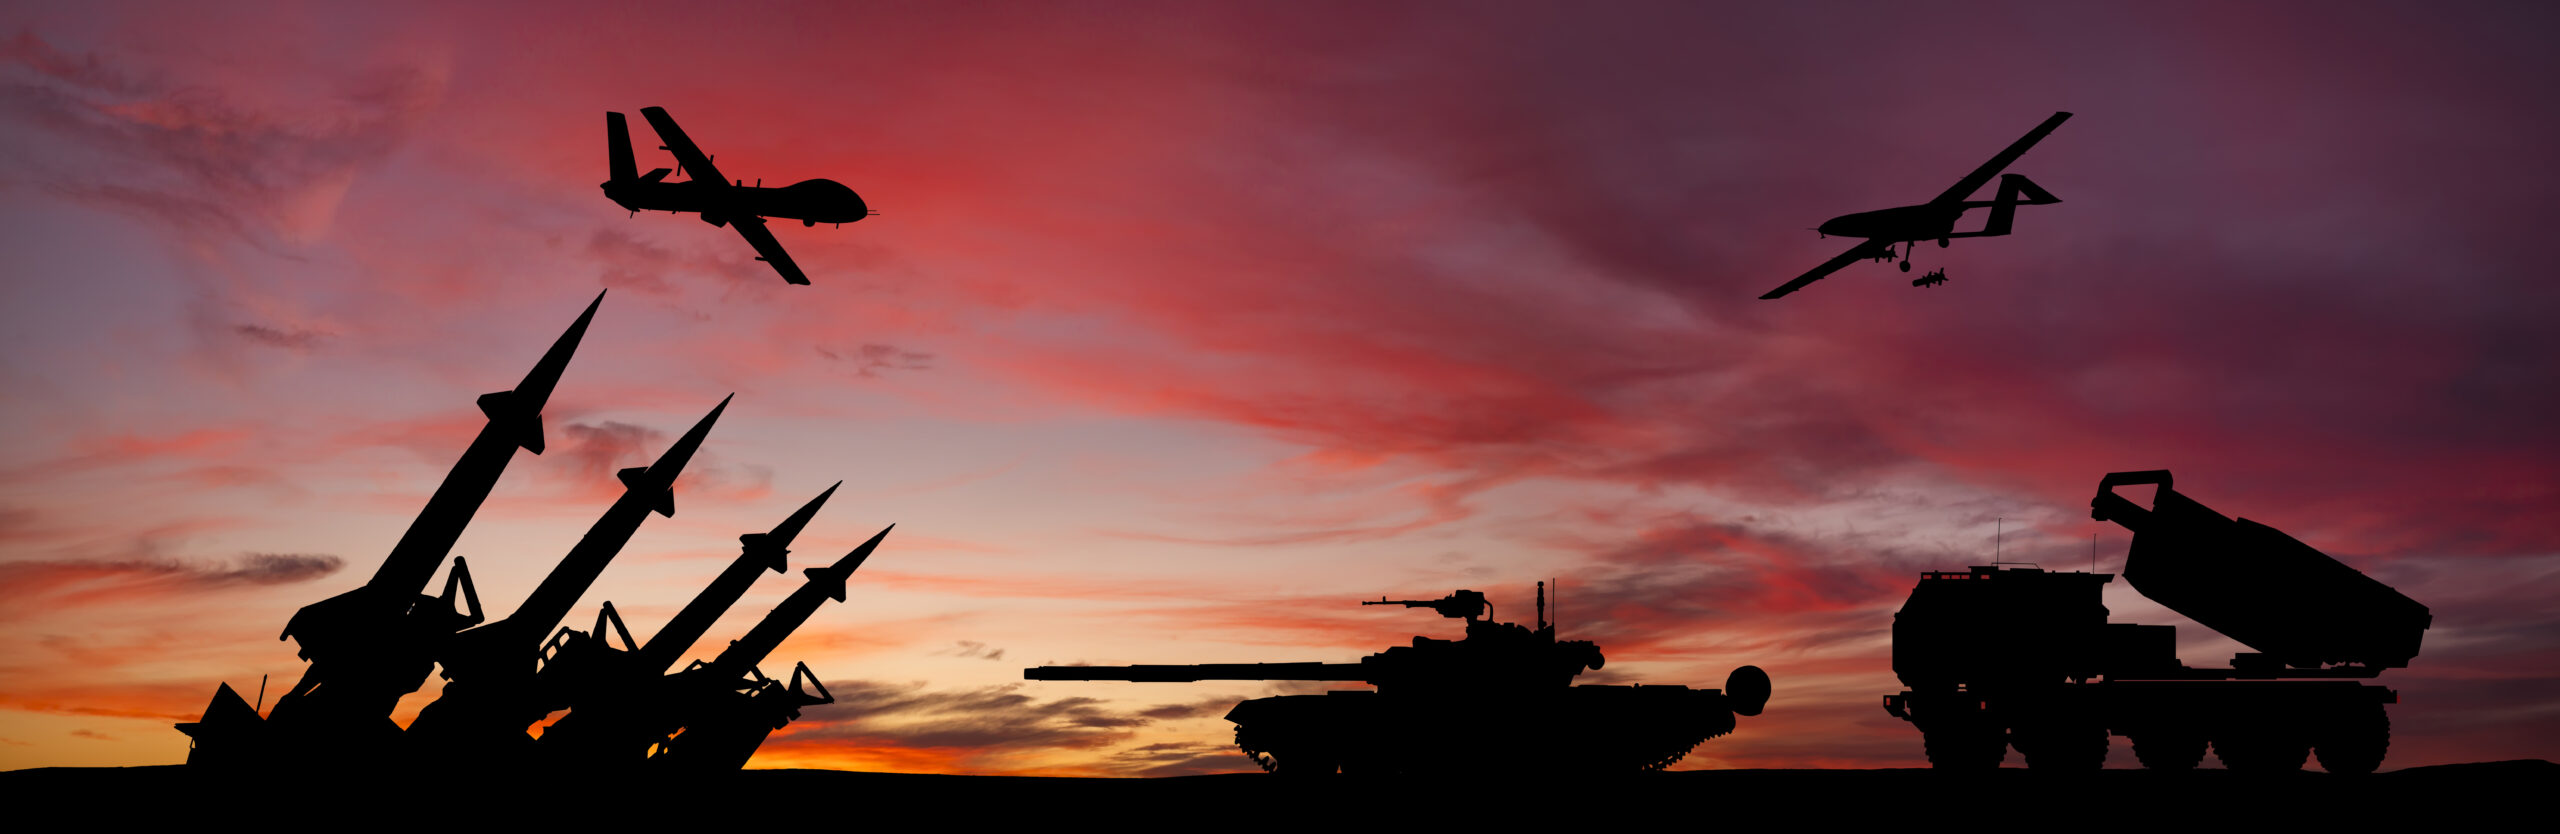 Weapons and airplanes in front of sunset (Anton Petrus/Getty Images)